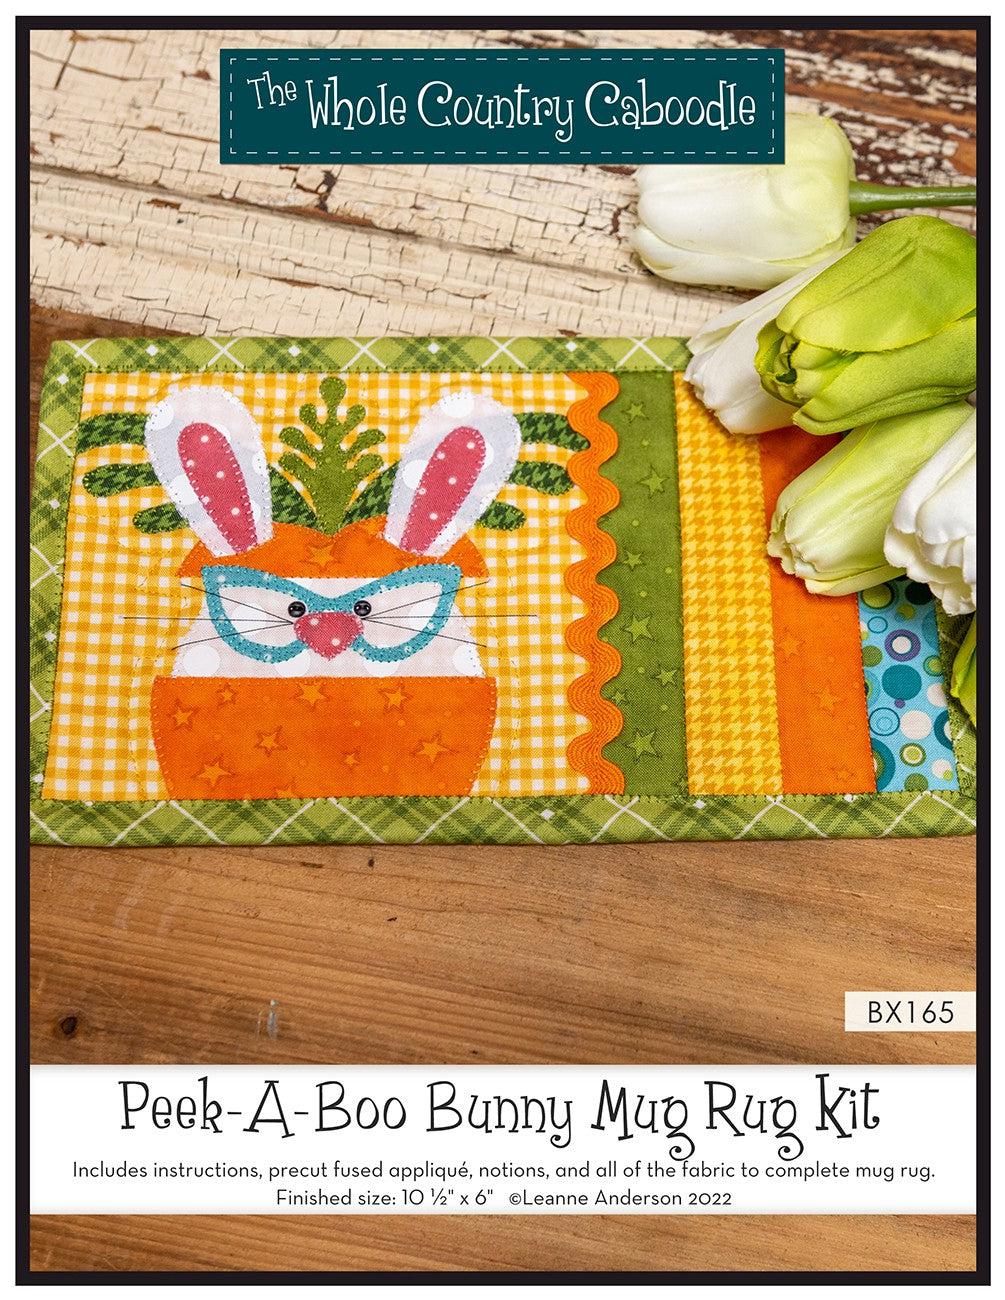 Peek-A-Boo Bunny Mug Rug Kit-The Whole Country Caboodle-My Favorite Quilt Store